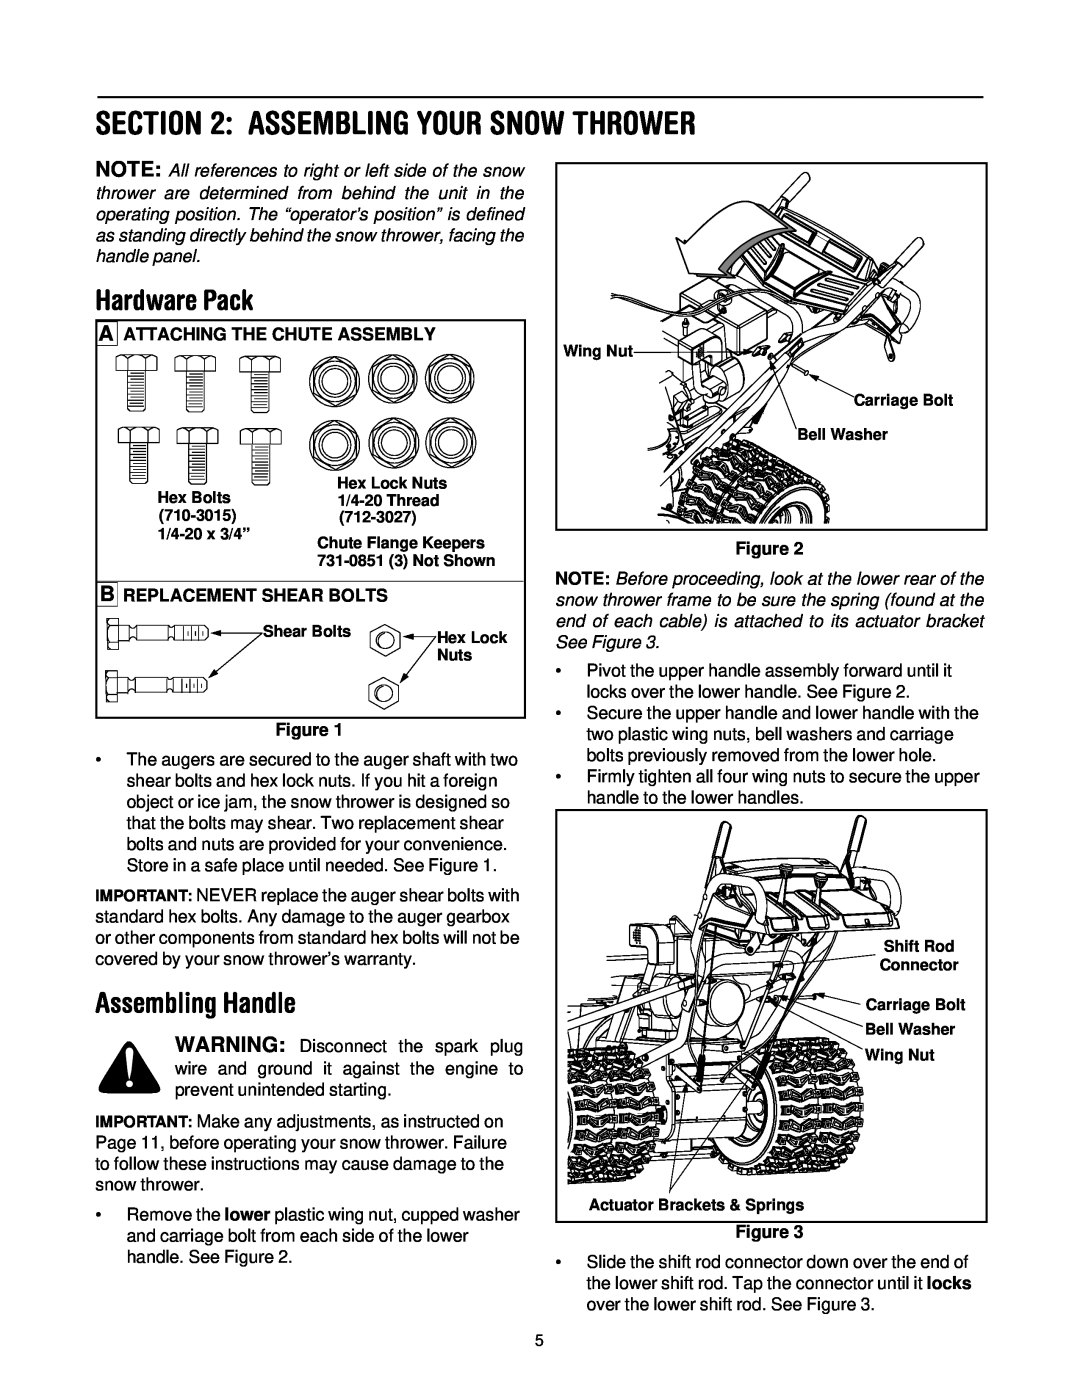 Troy-Bilt 13045 manual Assembling Your Snow Thrower, Hardware Pack, Assembling Handle, A Attaching The Chute Assembly 